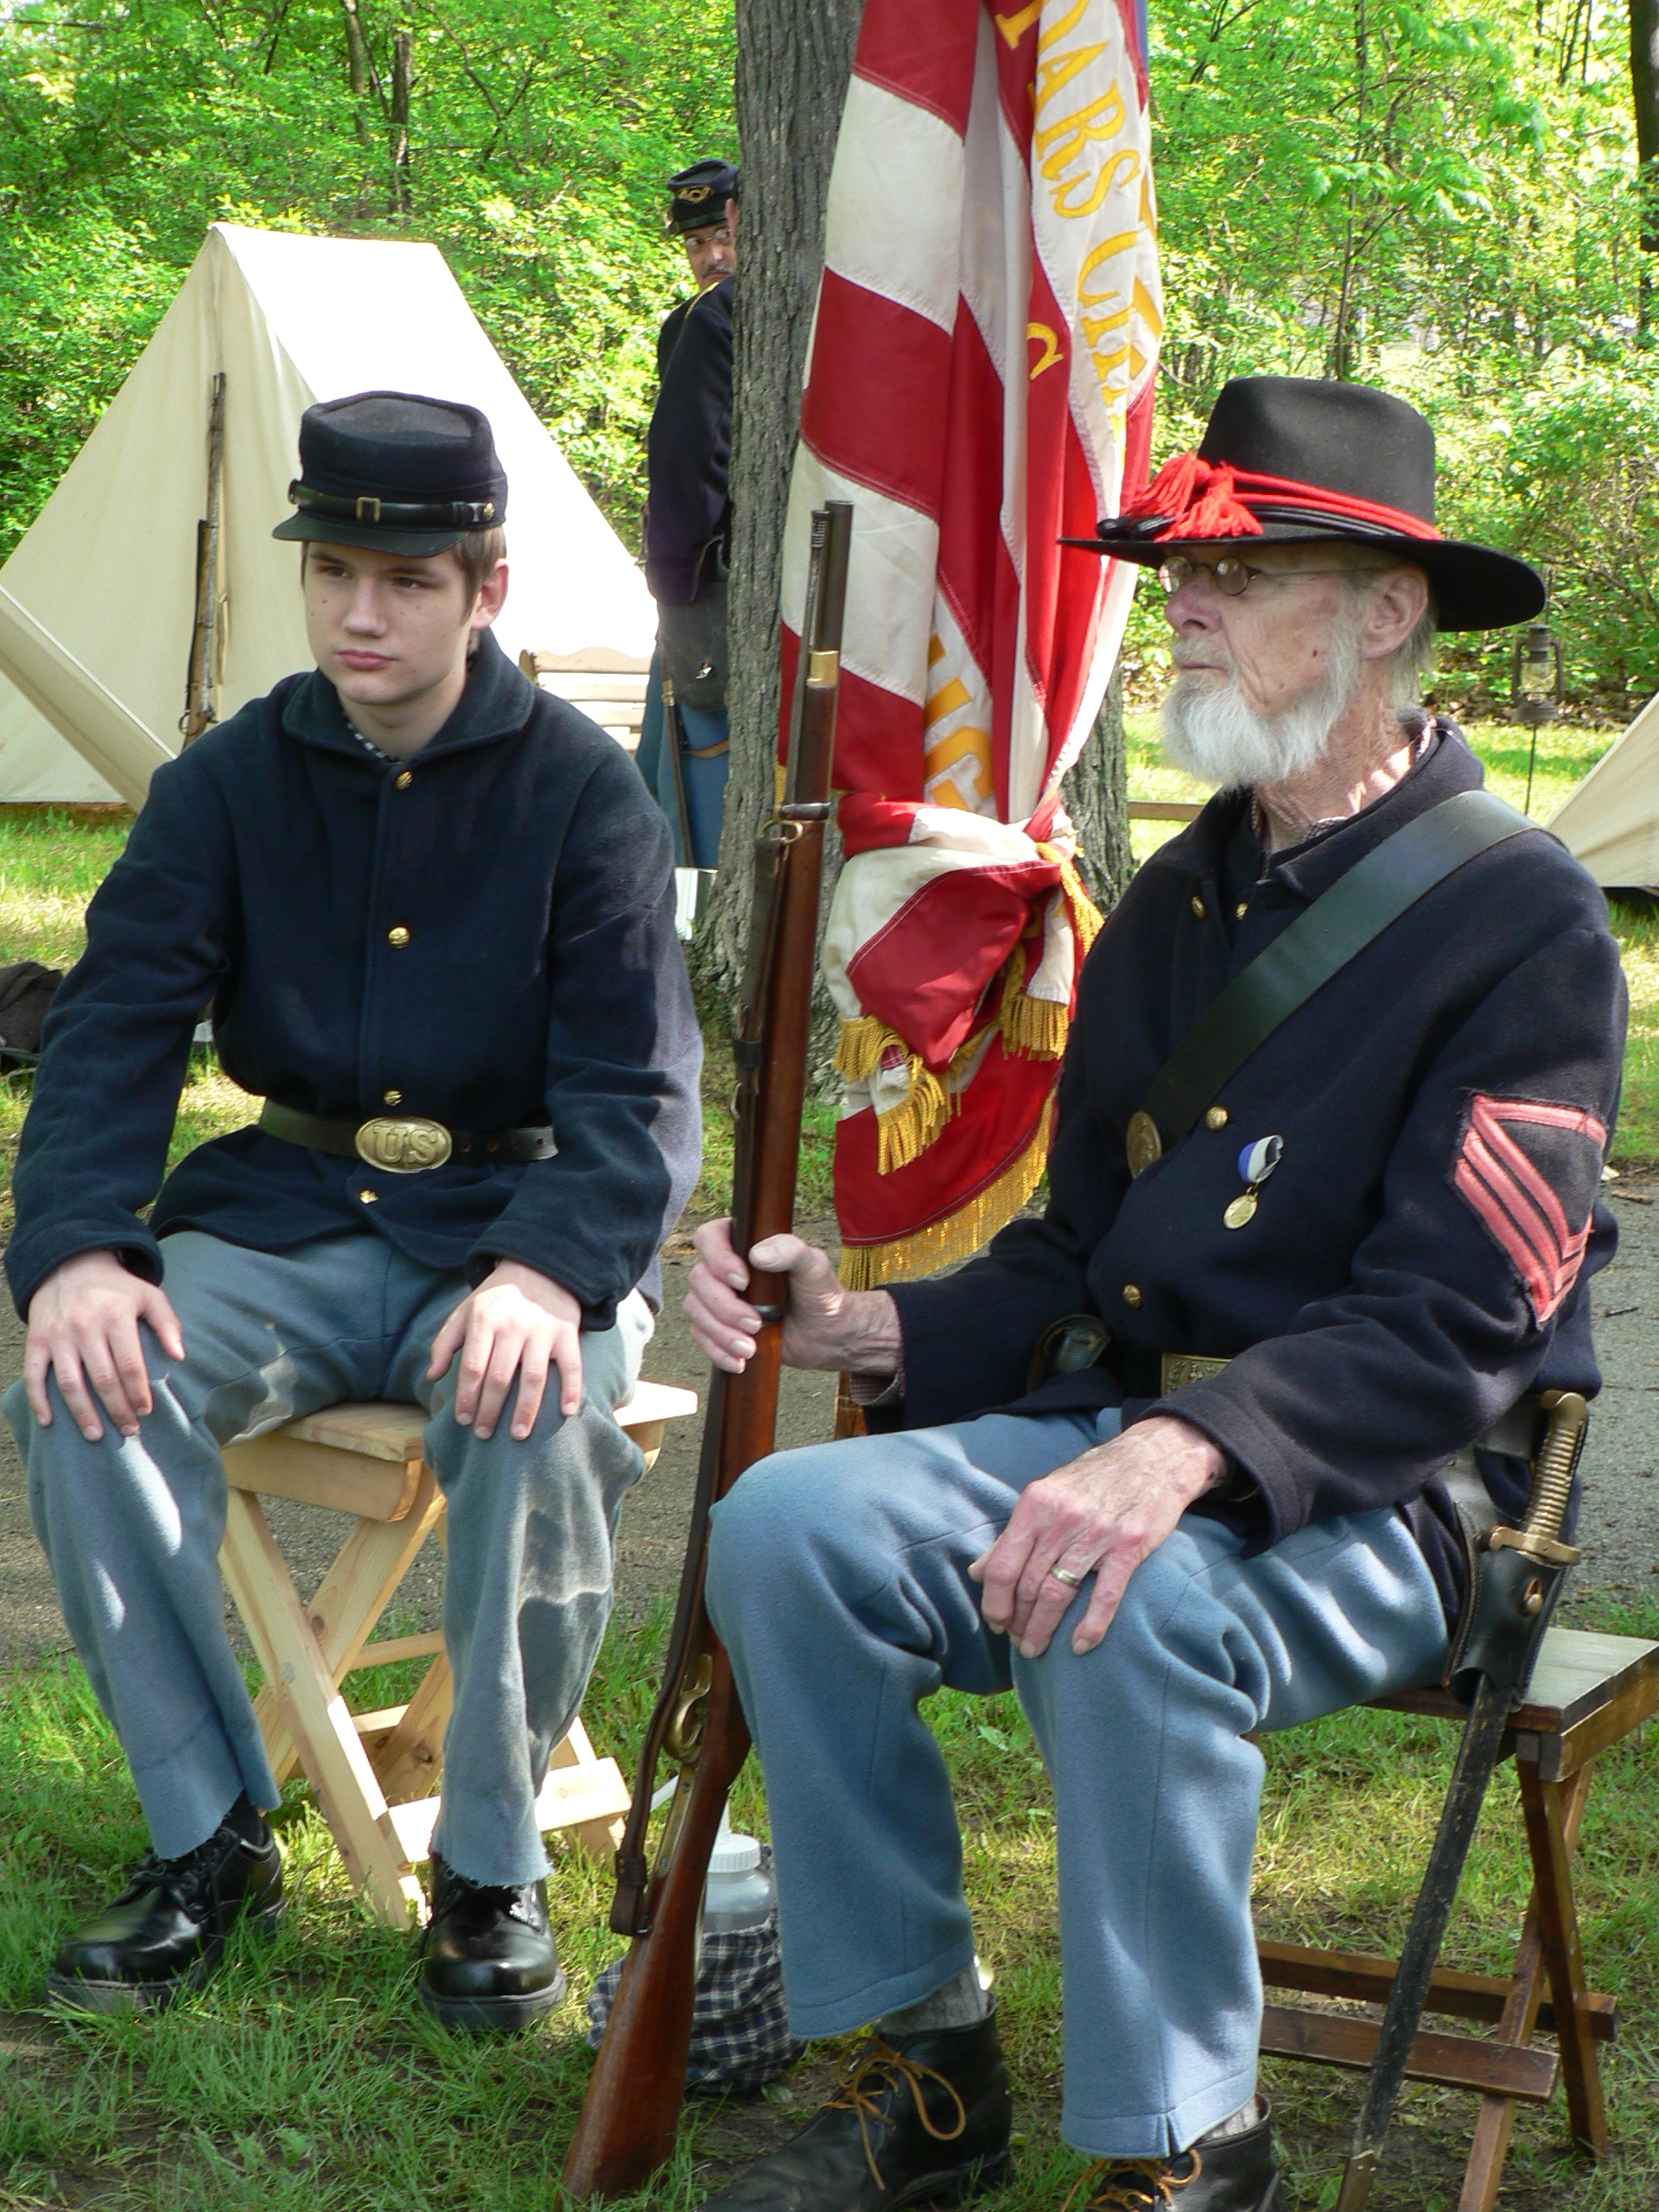 Two men dressed in war clothing